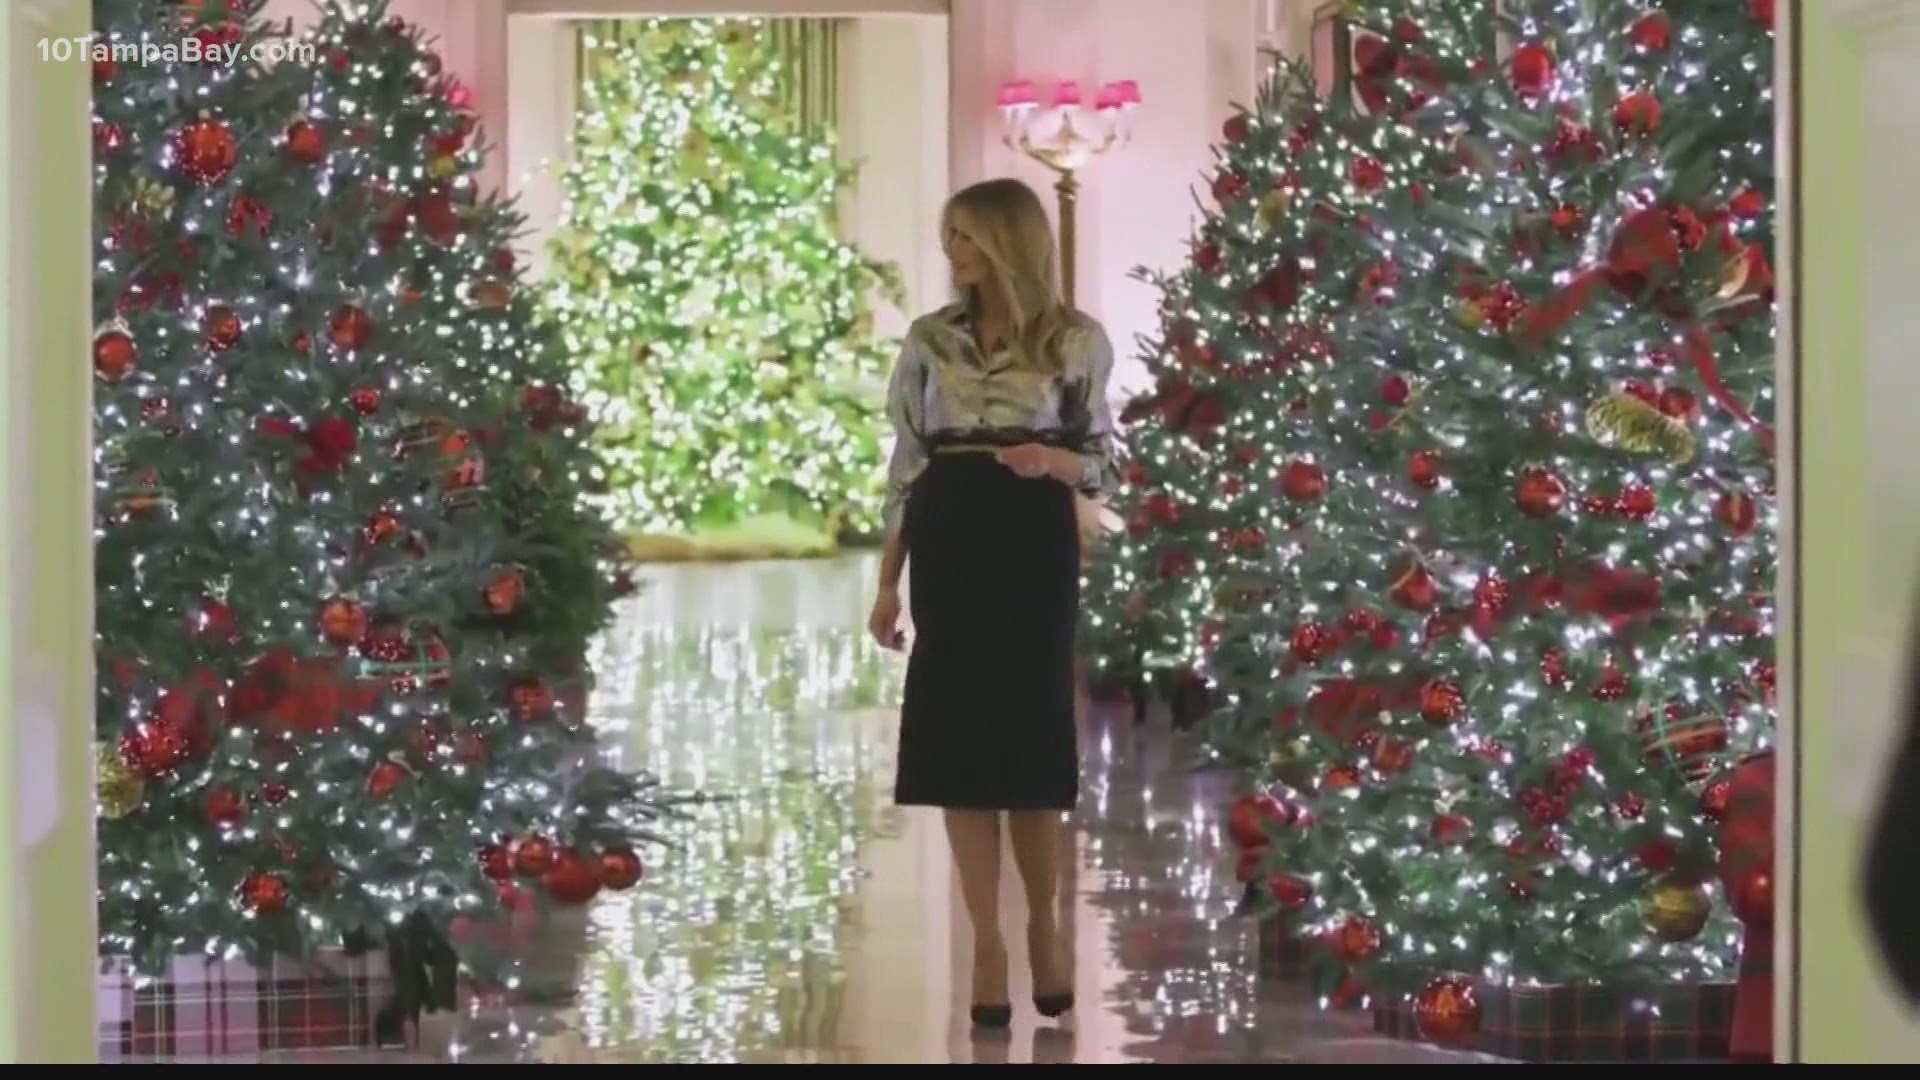 Volunteers helped decorate the White House after Thanksgiving with 62 Christmas trees, 106 wreaths, more than 3,200 strands of lights and 17,000 bows.